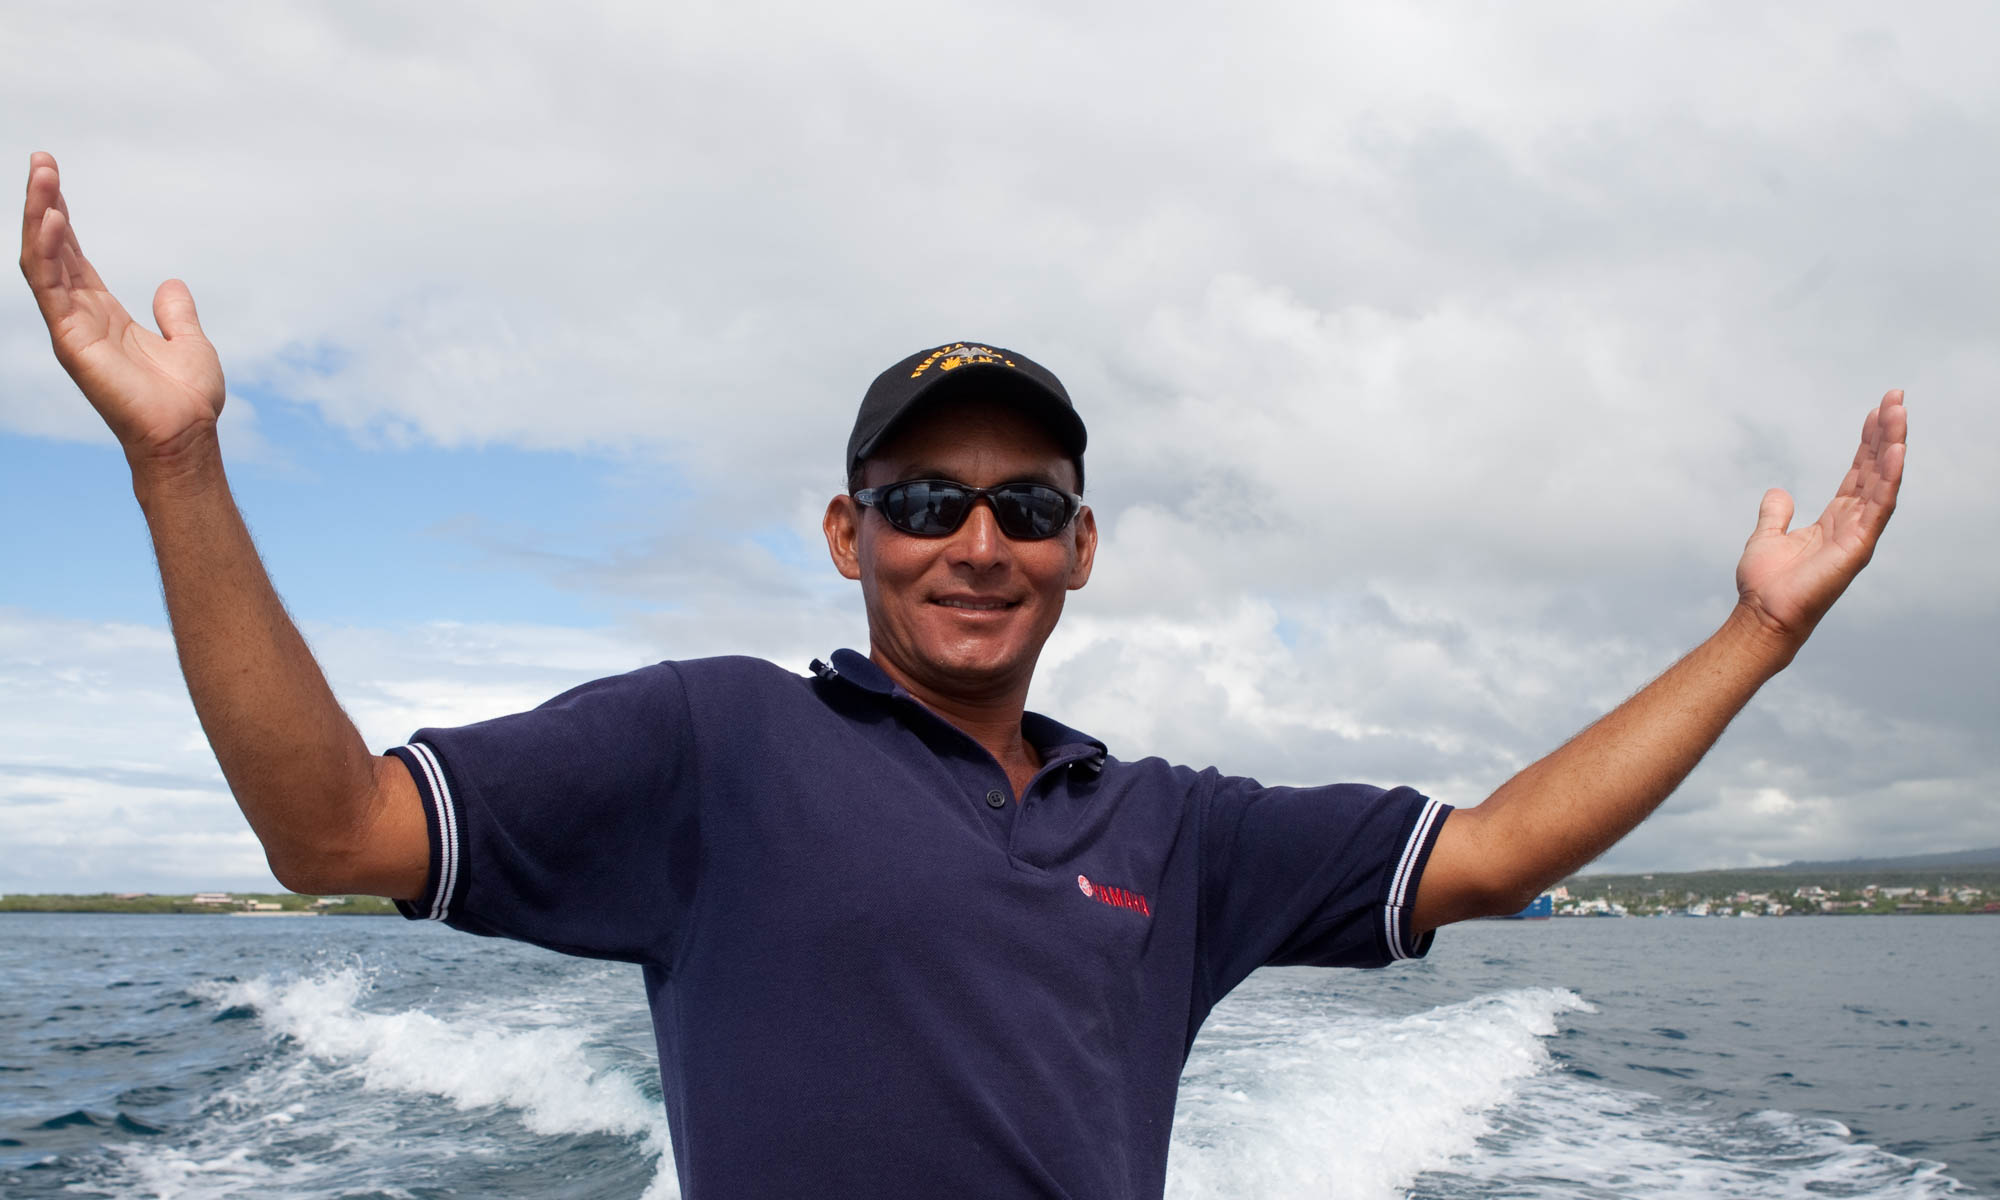 Man on boat with arms outstretched and smile on his face